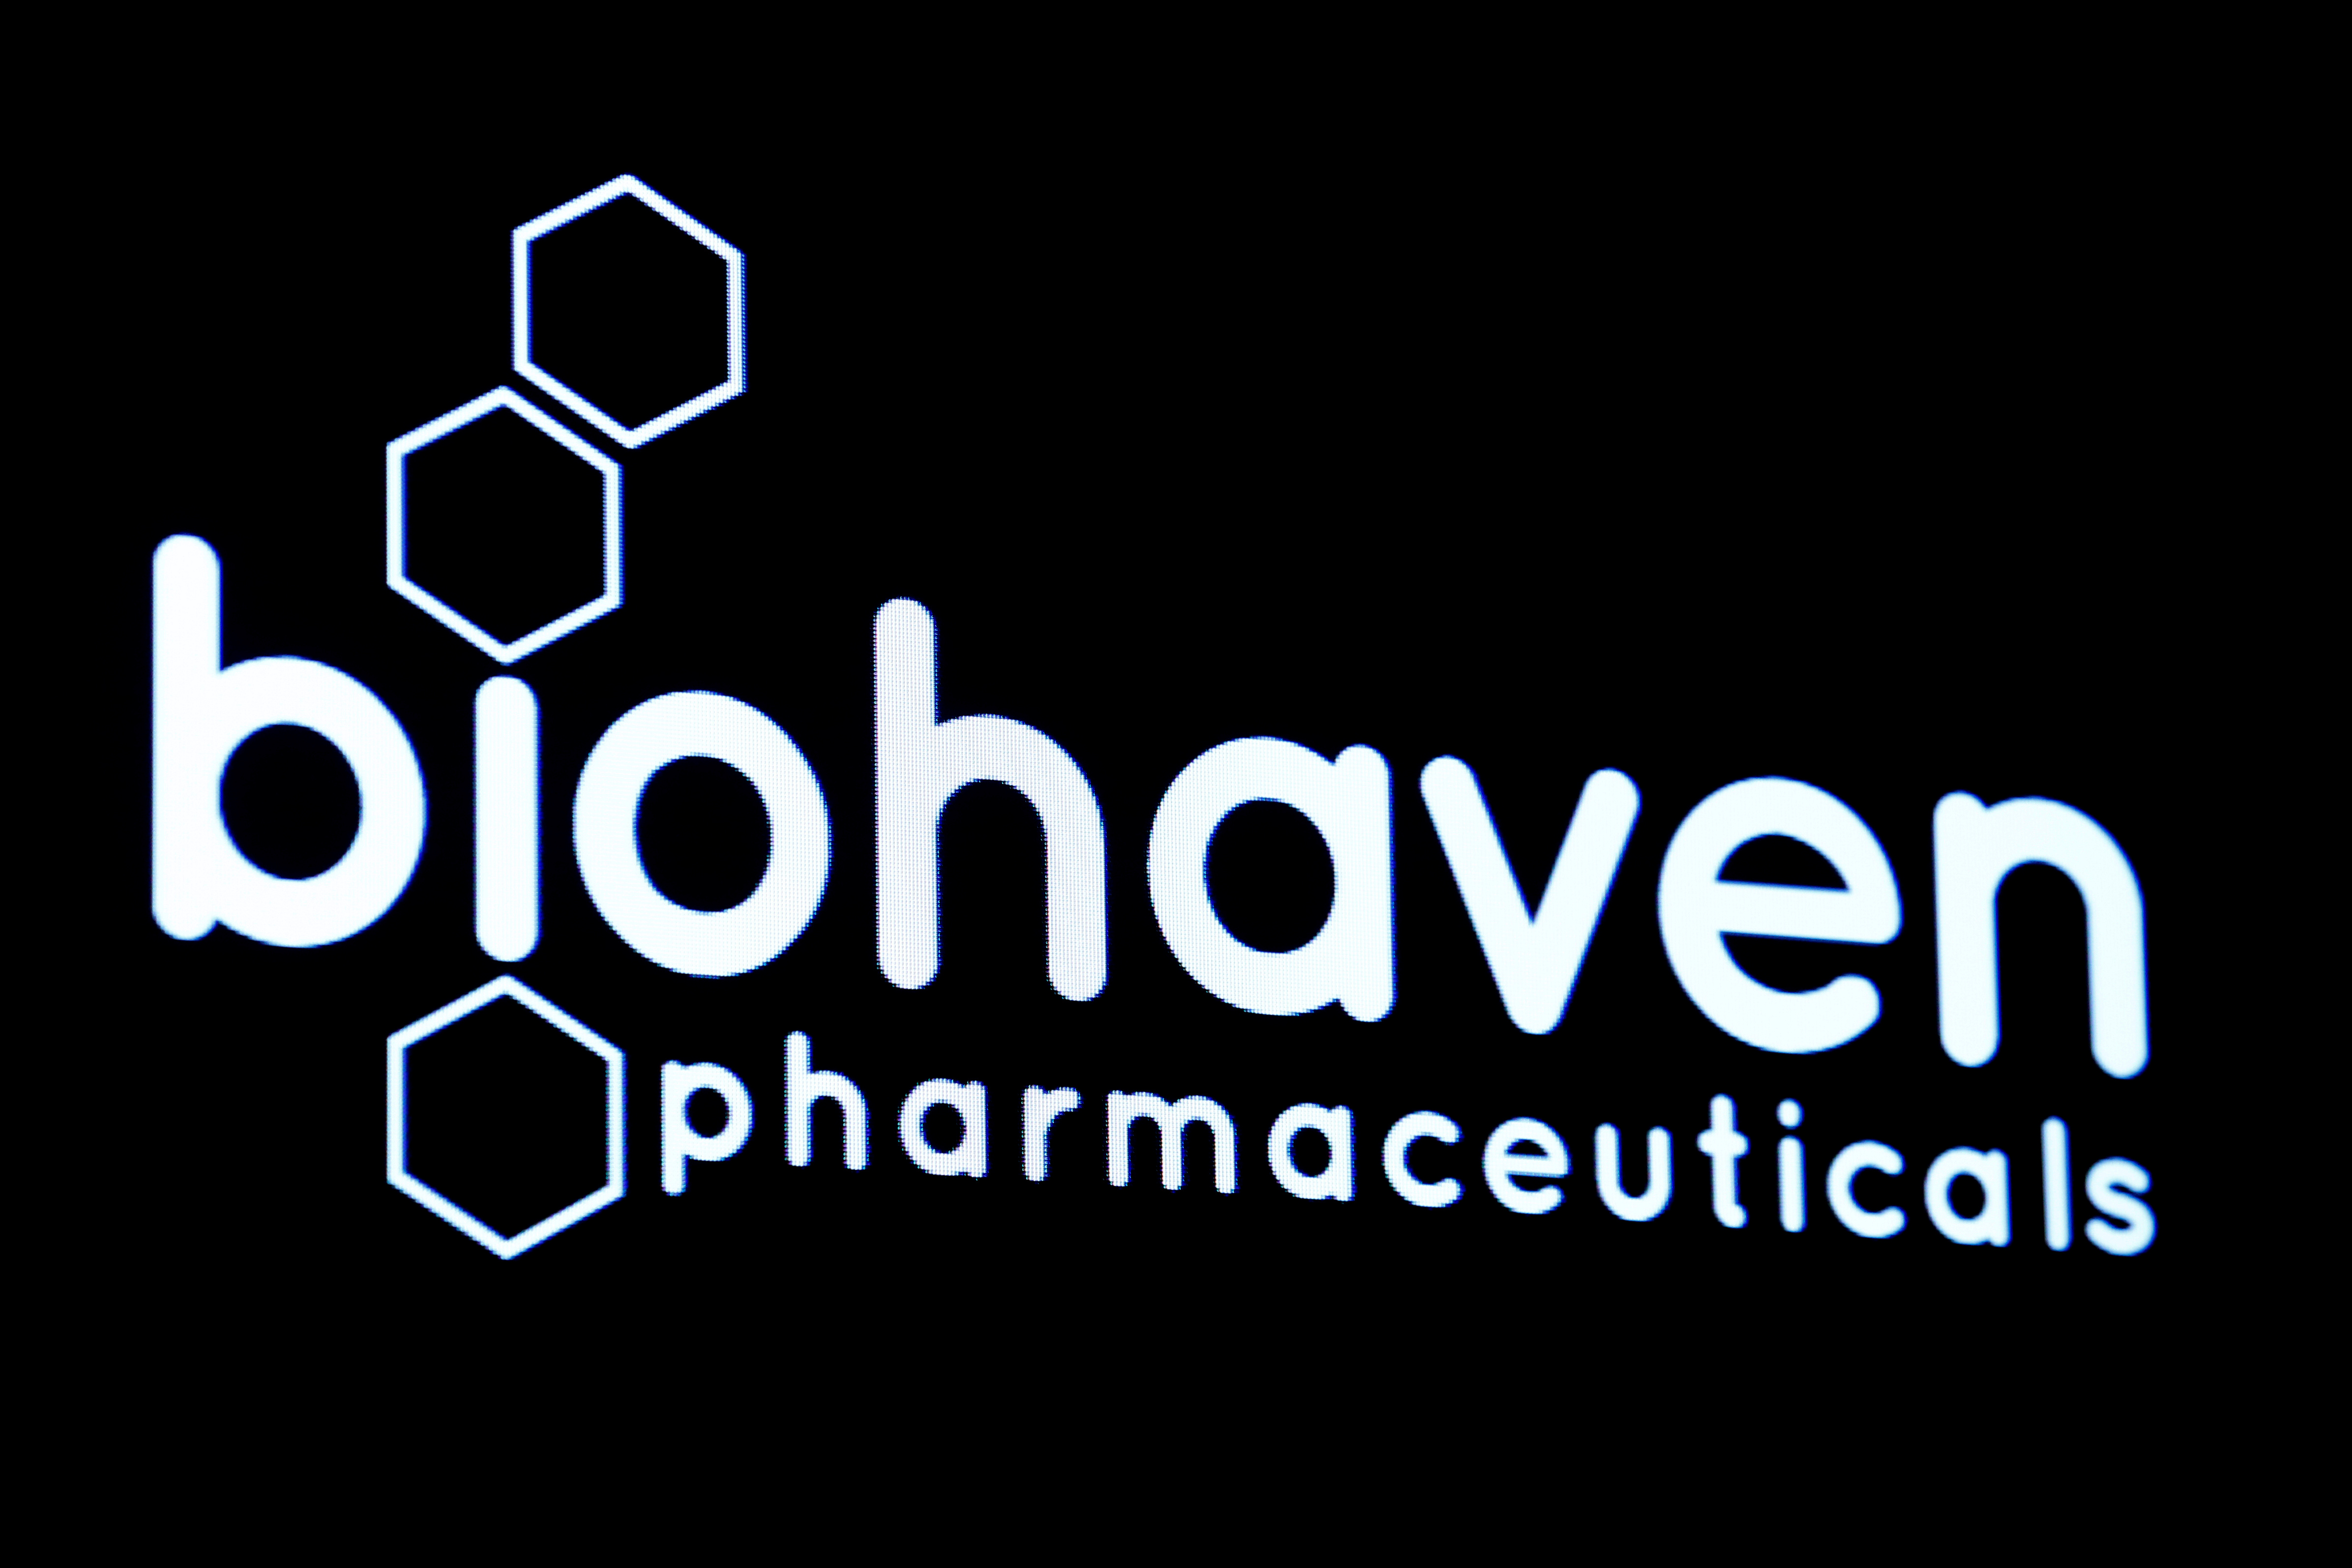 The logo for Biohaven Pharmaceutical Holding Company is displayed on a screen during the company's IPO on the floor of the New York Stock Exchange (NYSE) in New York, U.S., May 4, 2017. REUTERS/Brendan McDermid